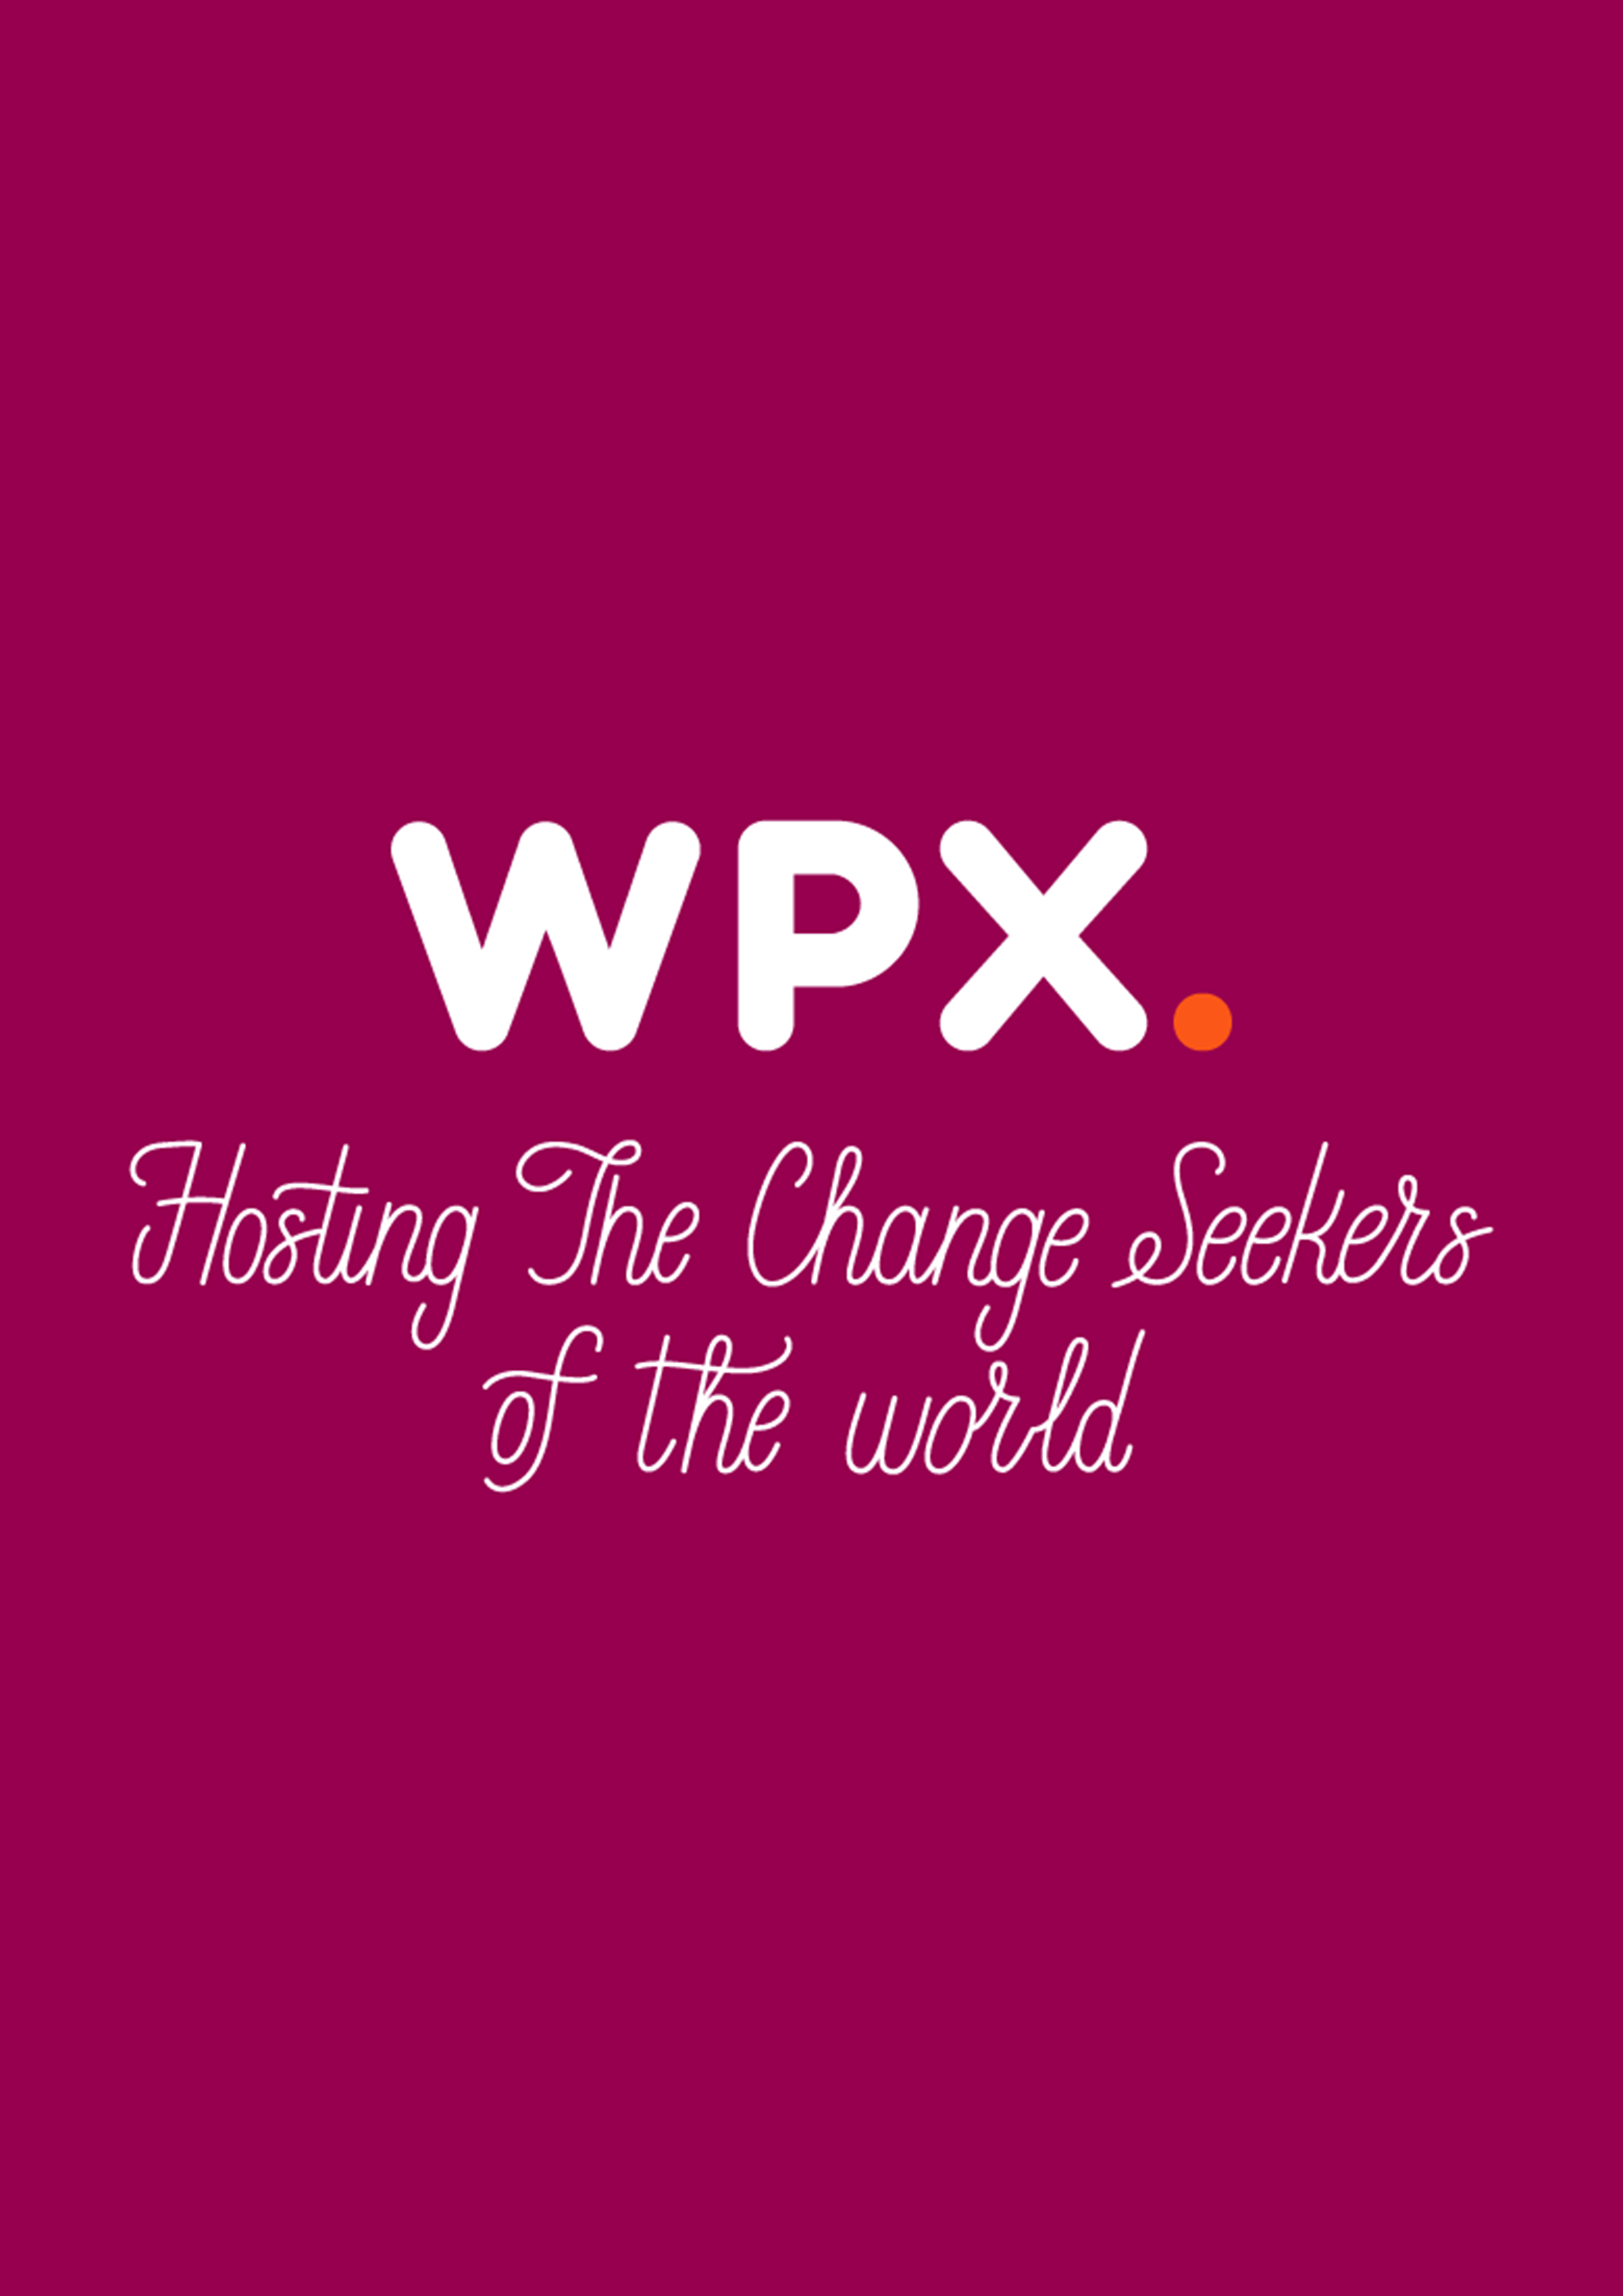 WPX Brand Promotion